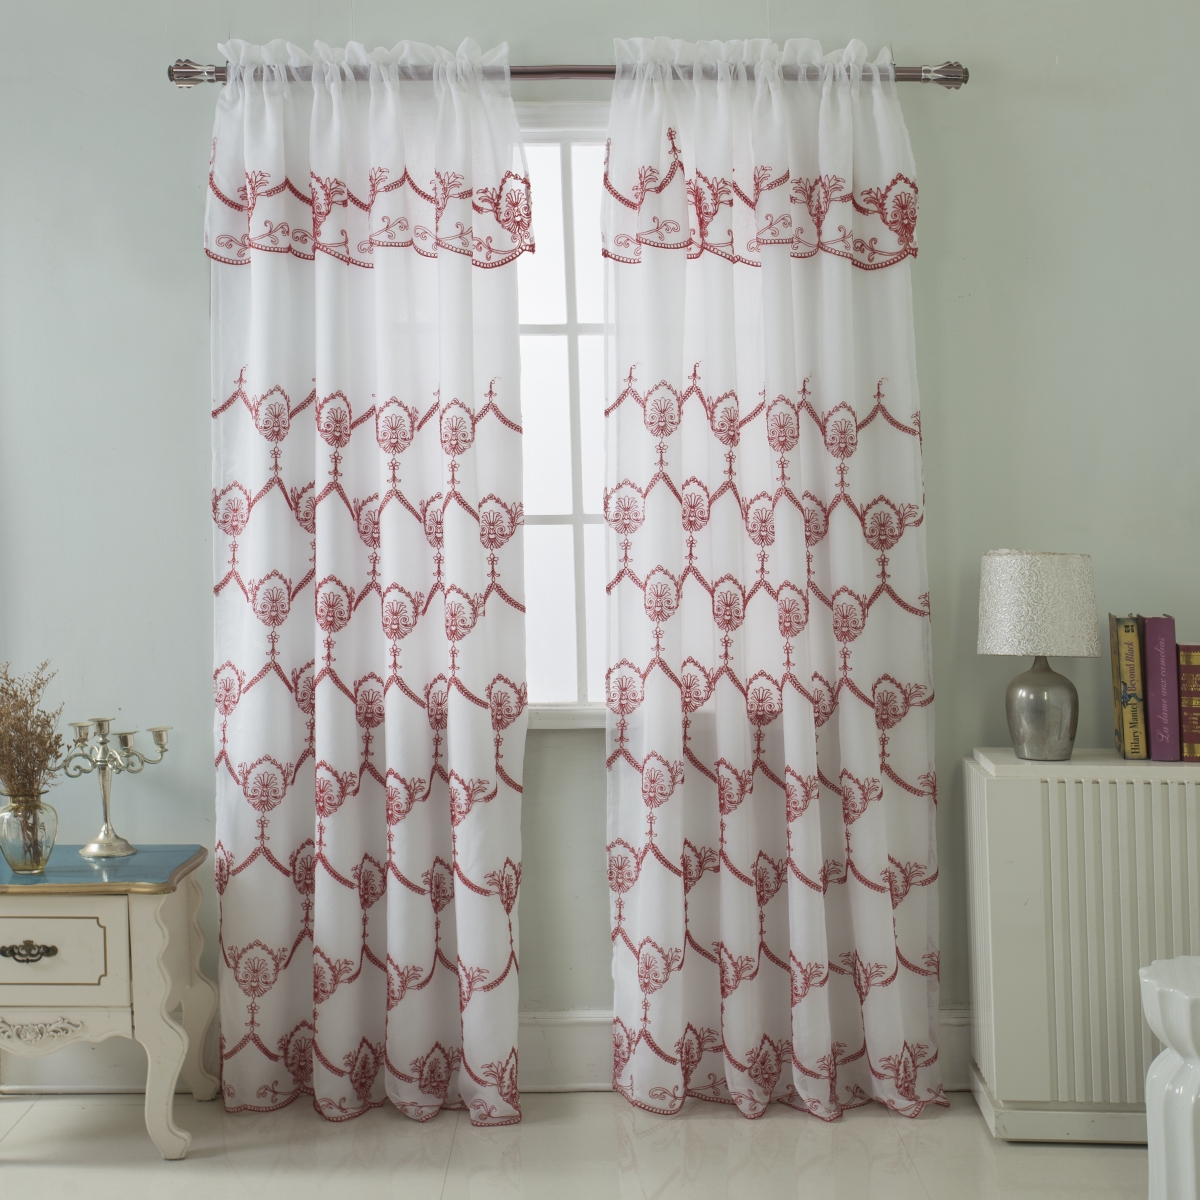 Pnr17077 54 X 84 In. Rochelle Embroidered Satin Layered Rod Pocket Single Curtain Panel With Attached 18 In. Valance, Red